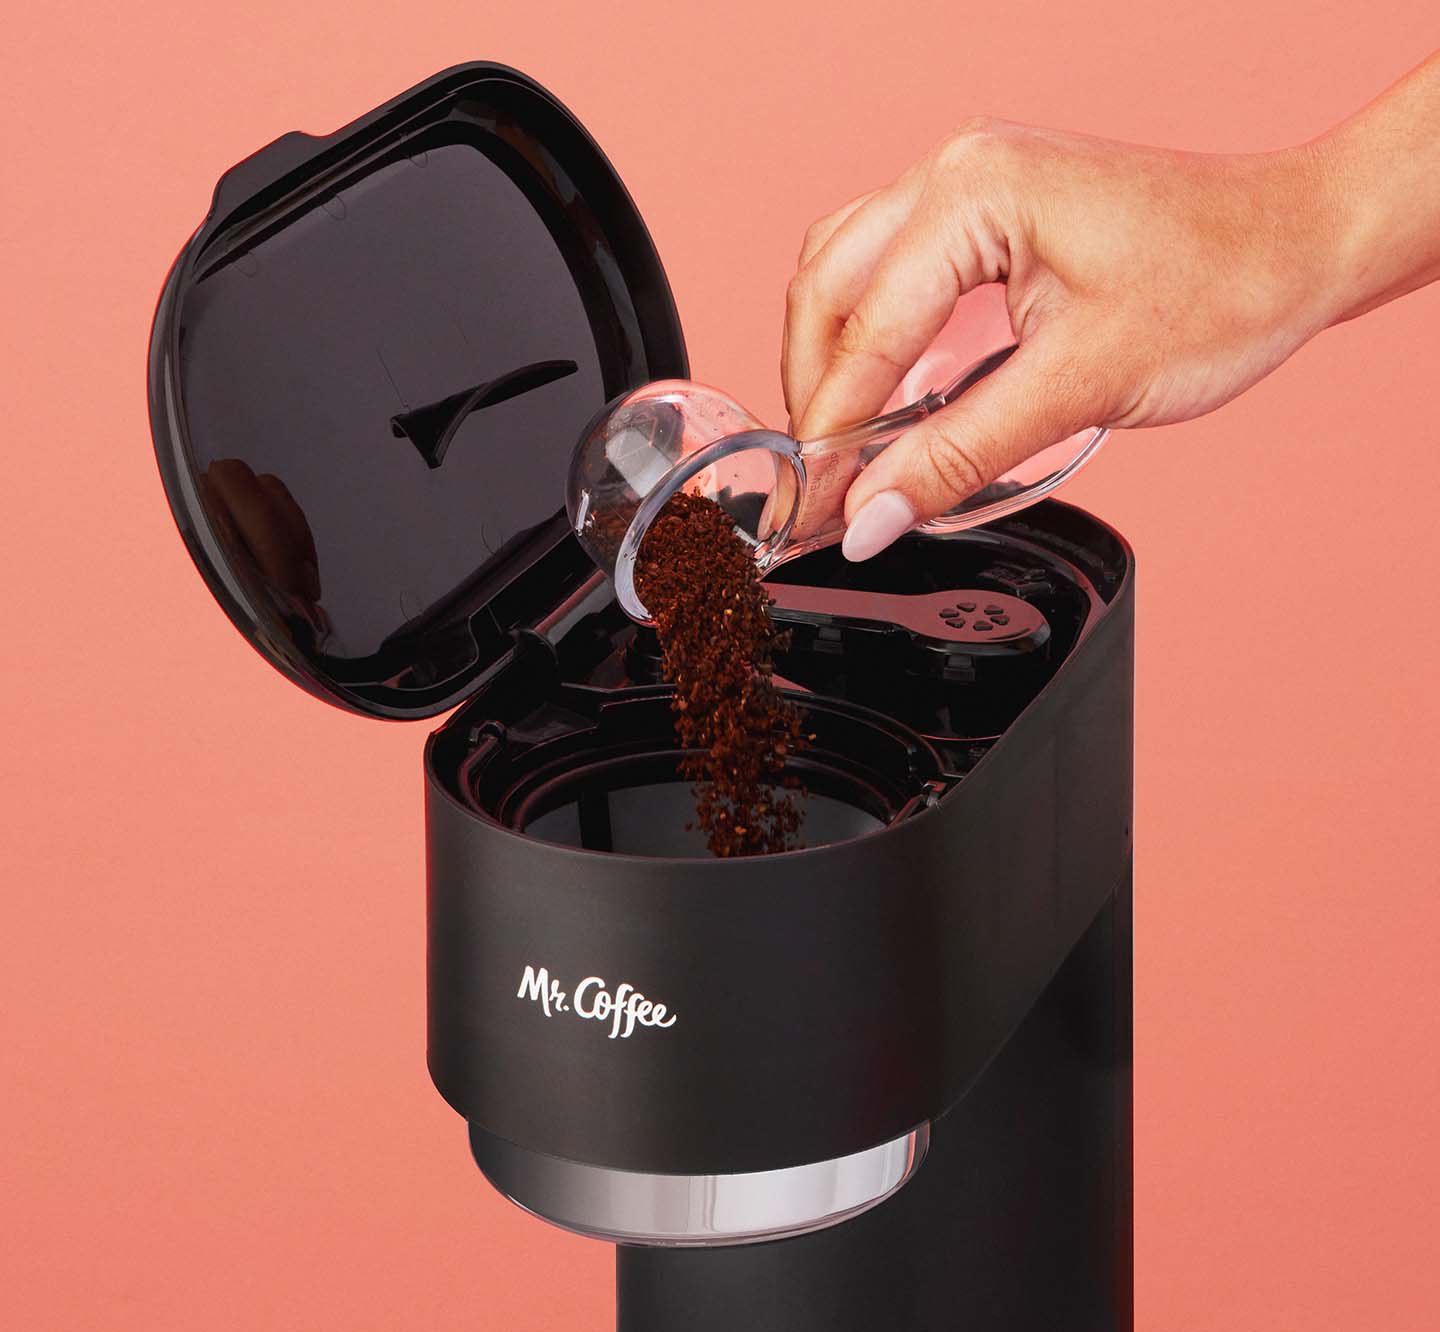 Putting coffee grounds into a coffeemaker